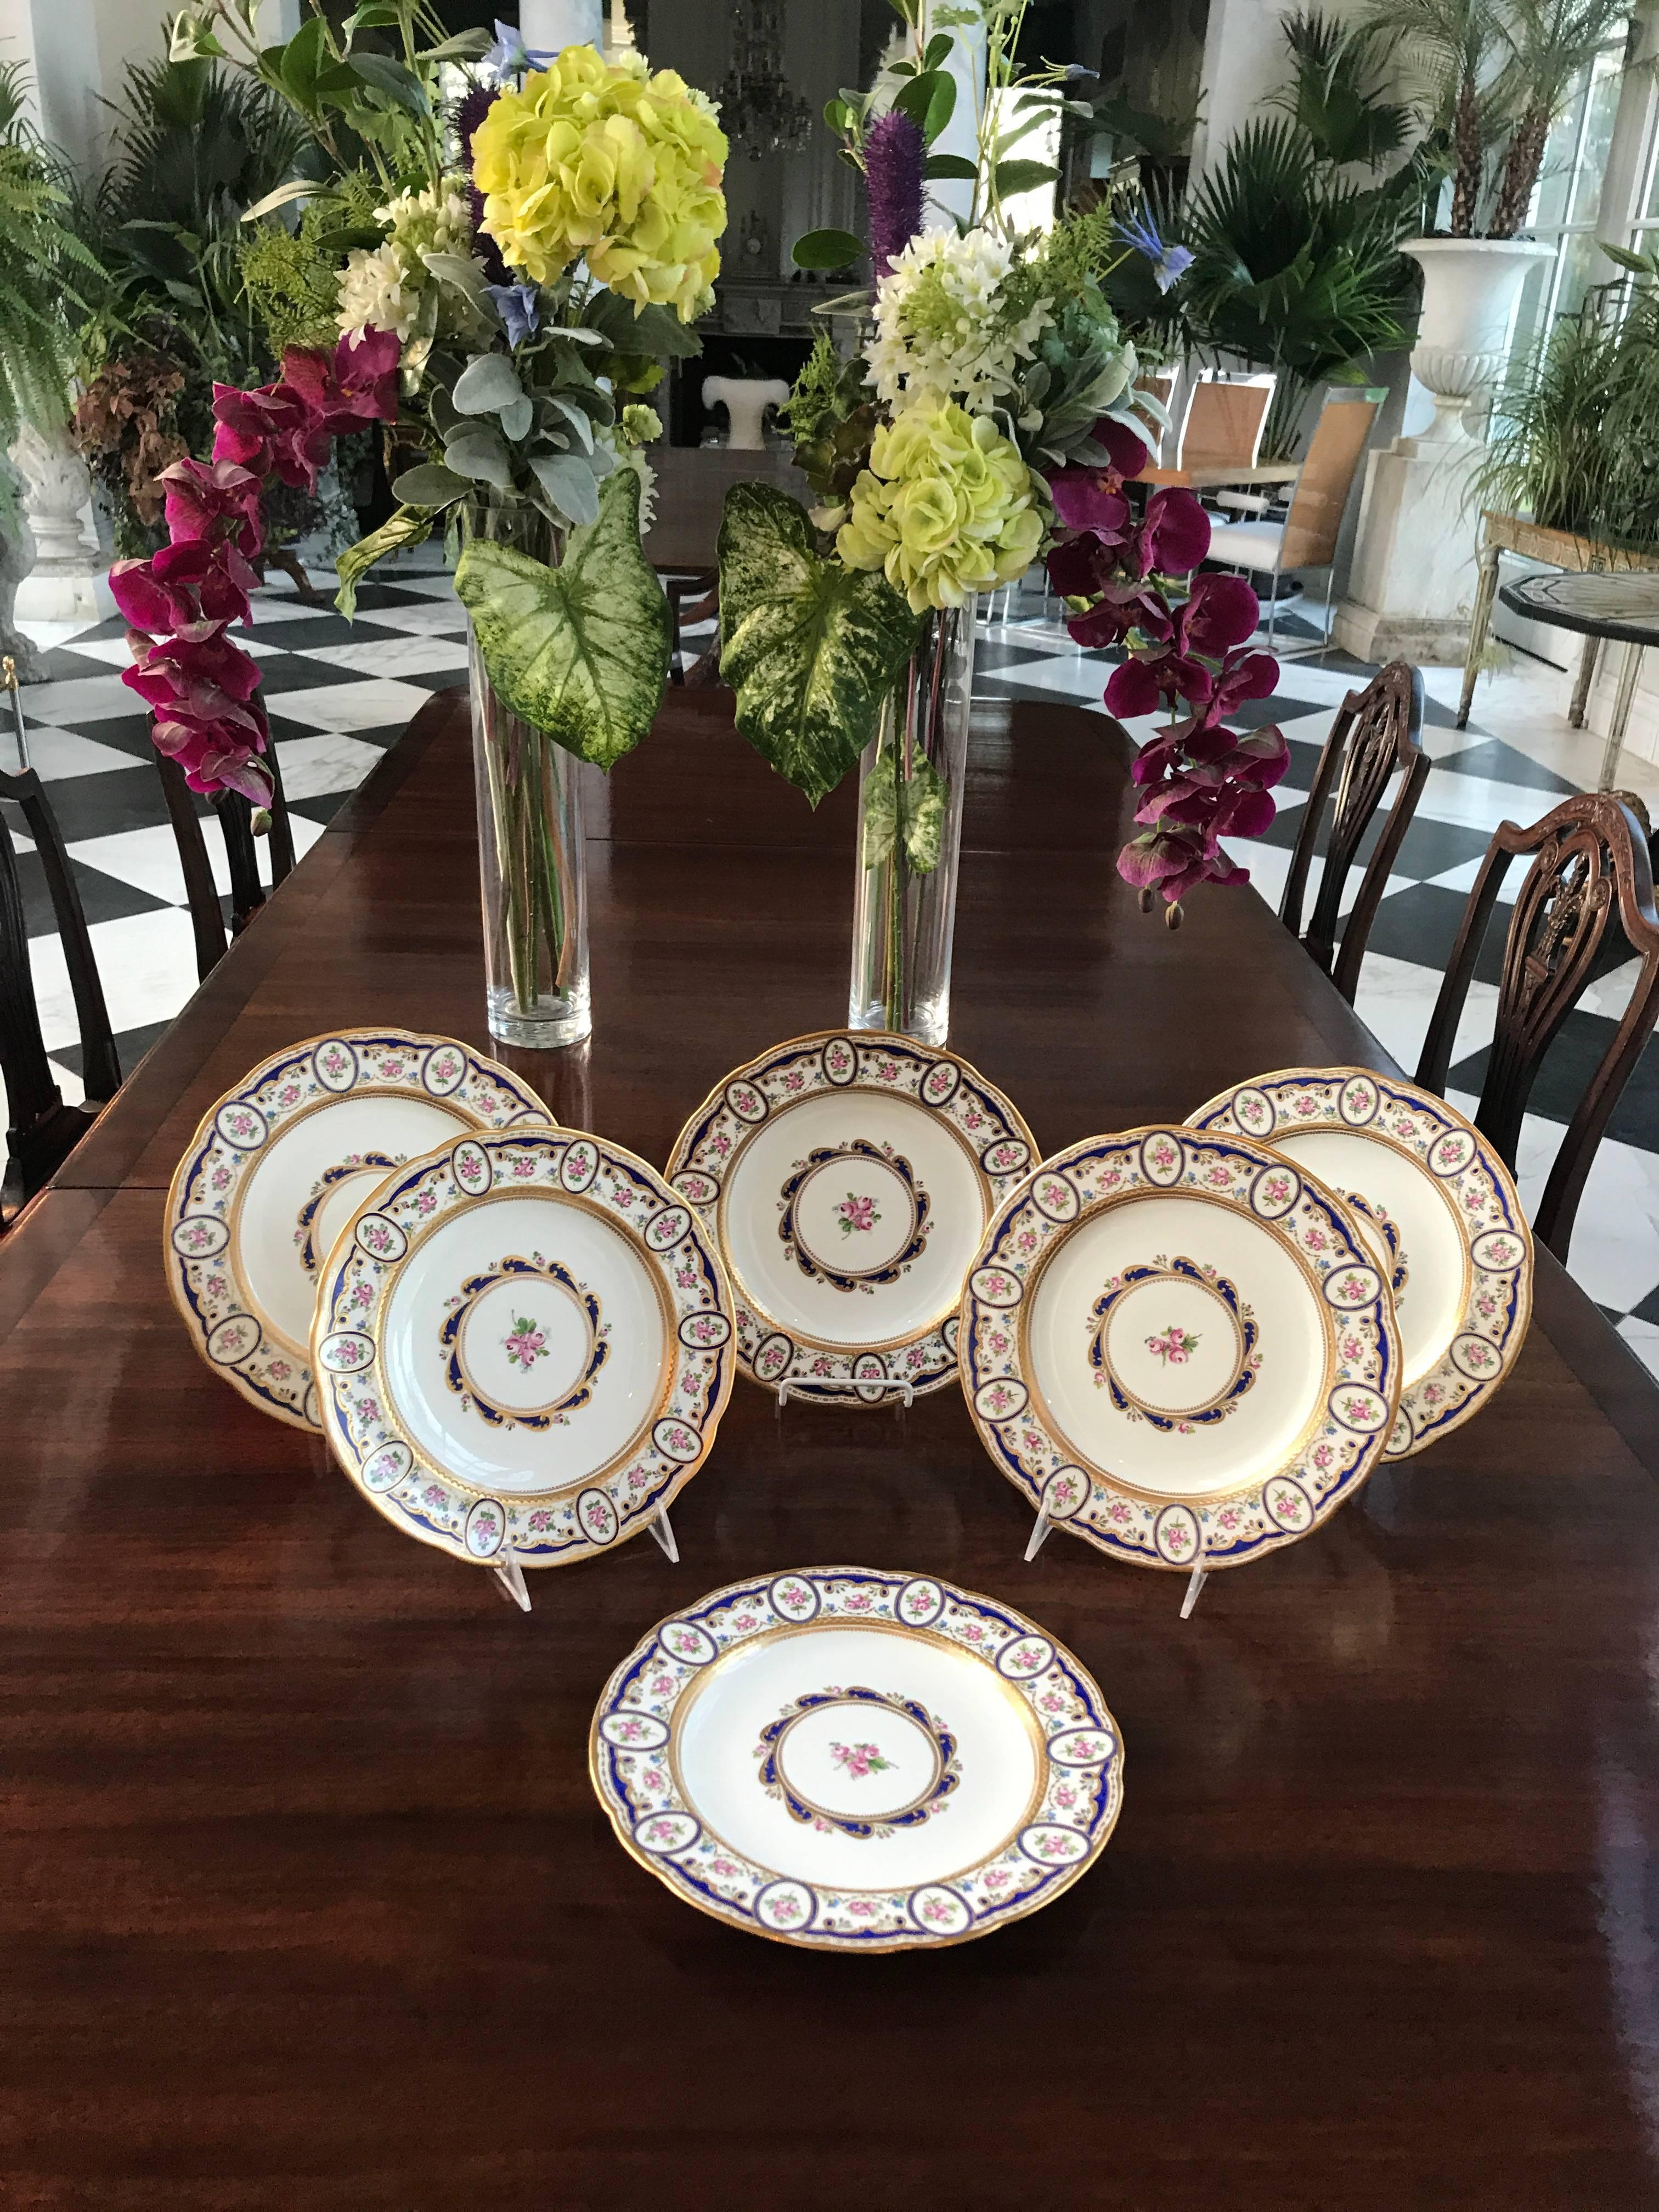 This breath-taking and rare Set of six Dinner Plates was manufactured by France's best Porcelain manufacturer Sèvres in the late 19th century. 
The surface is elaborately decorated in jewel tones, the pink rose bundles are framed in ovals around the